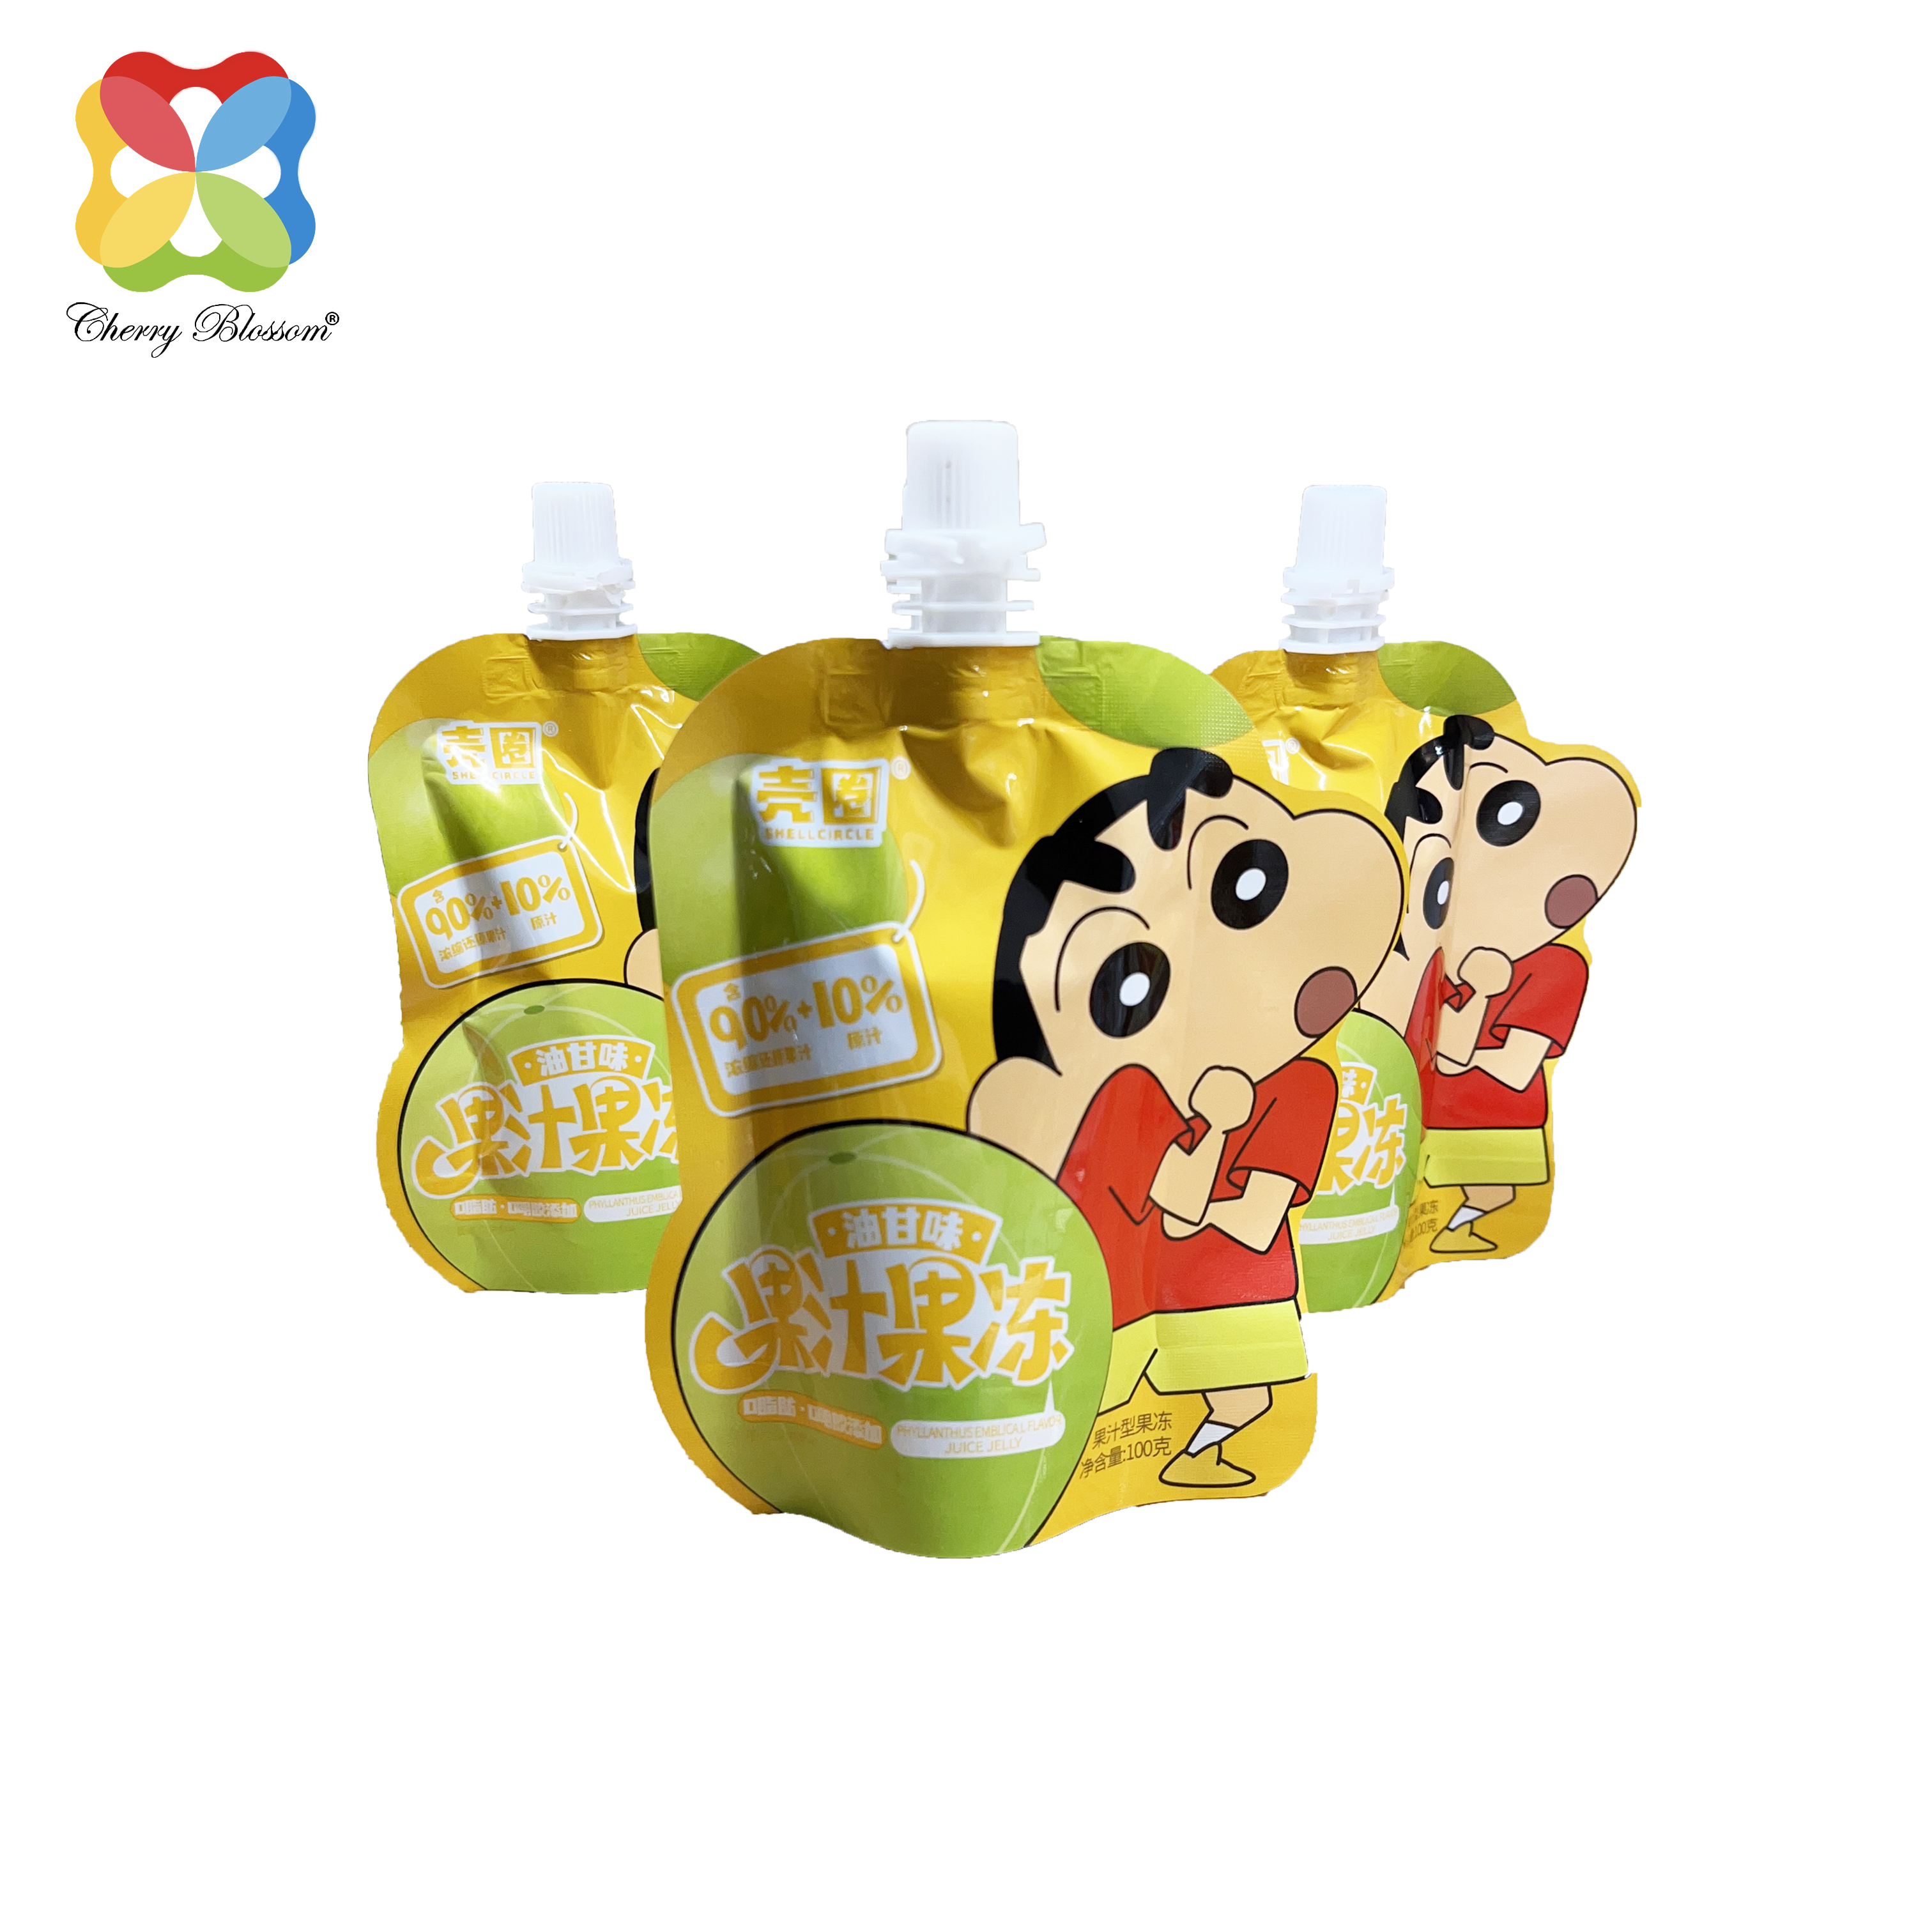 Jelly packaging
Food packaging
Liquid packaging
Customized printing for packaging